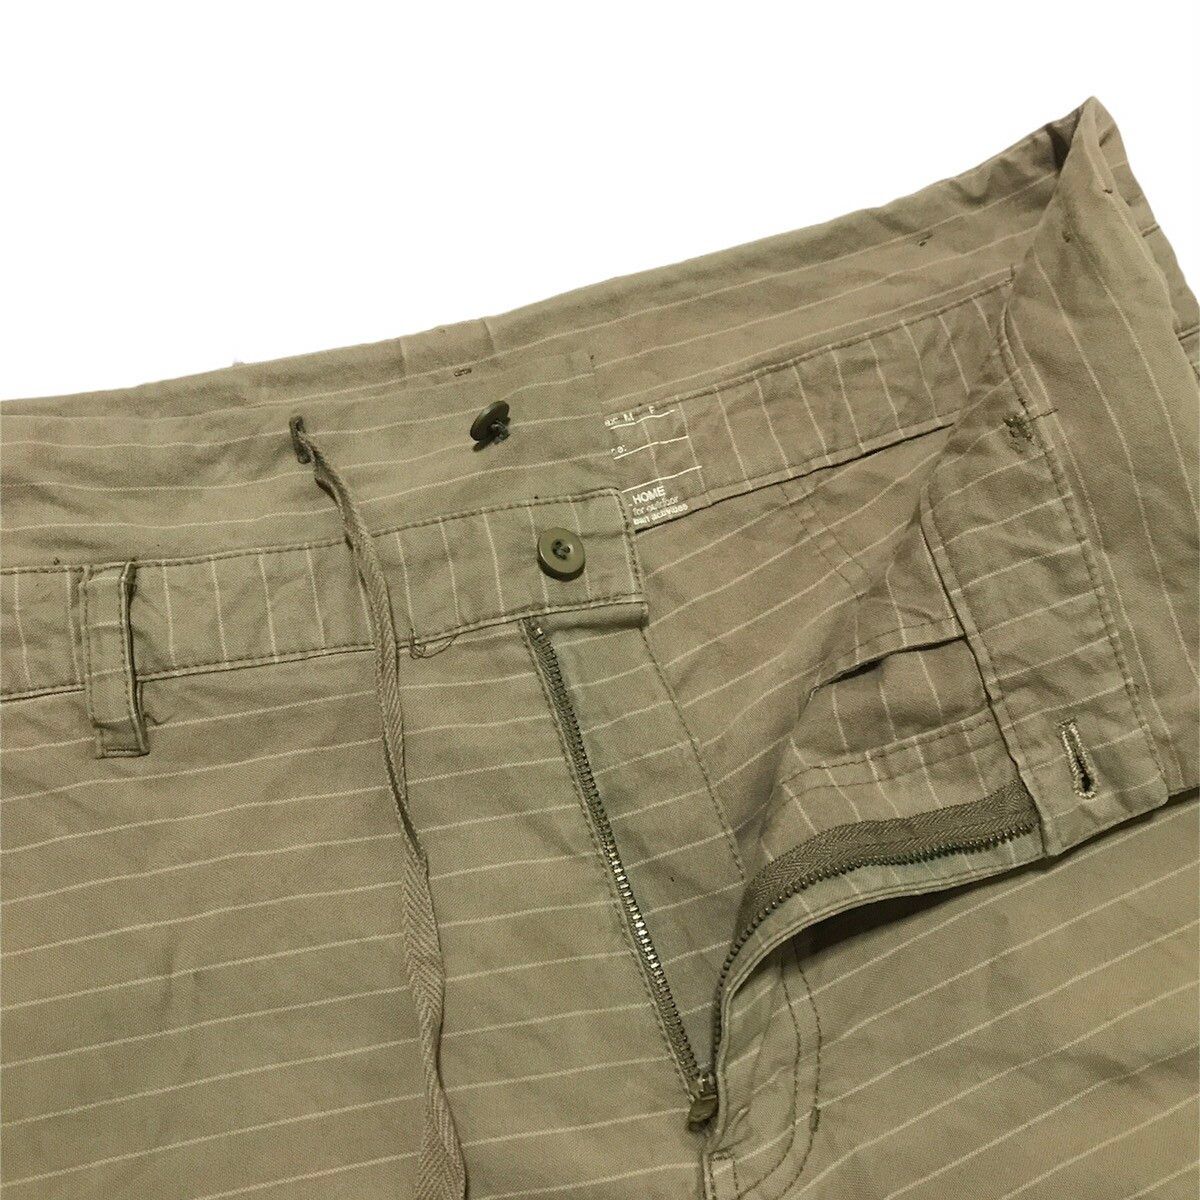 Final Home Military trouser pants - 2